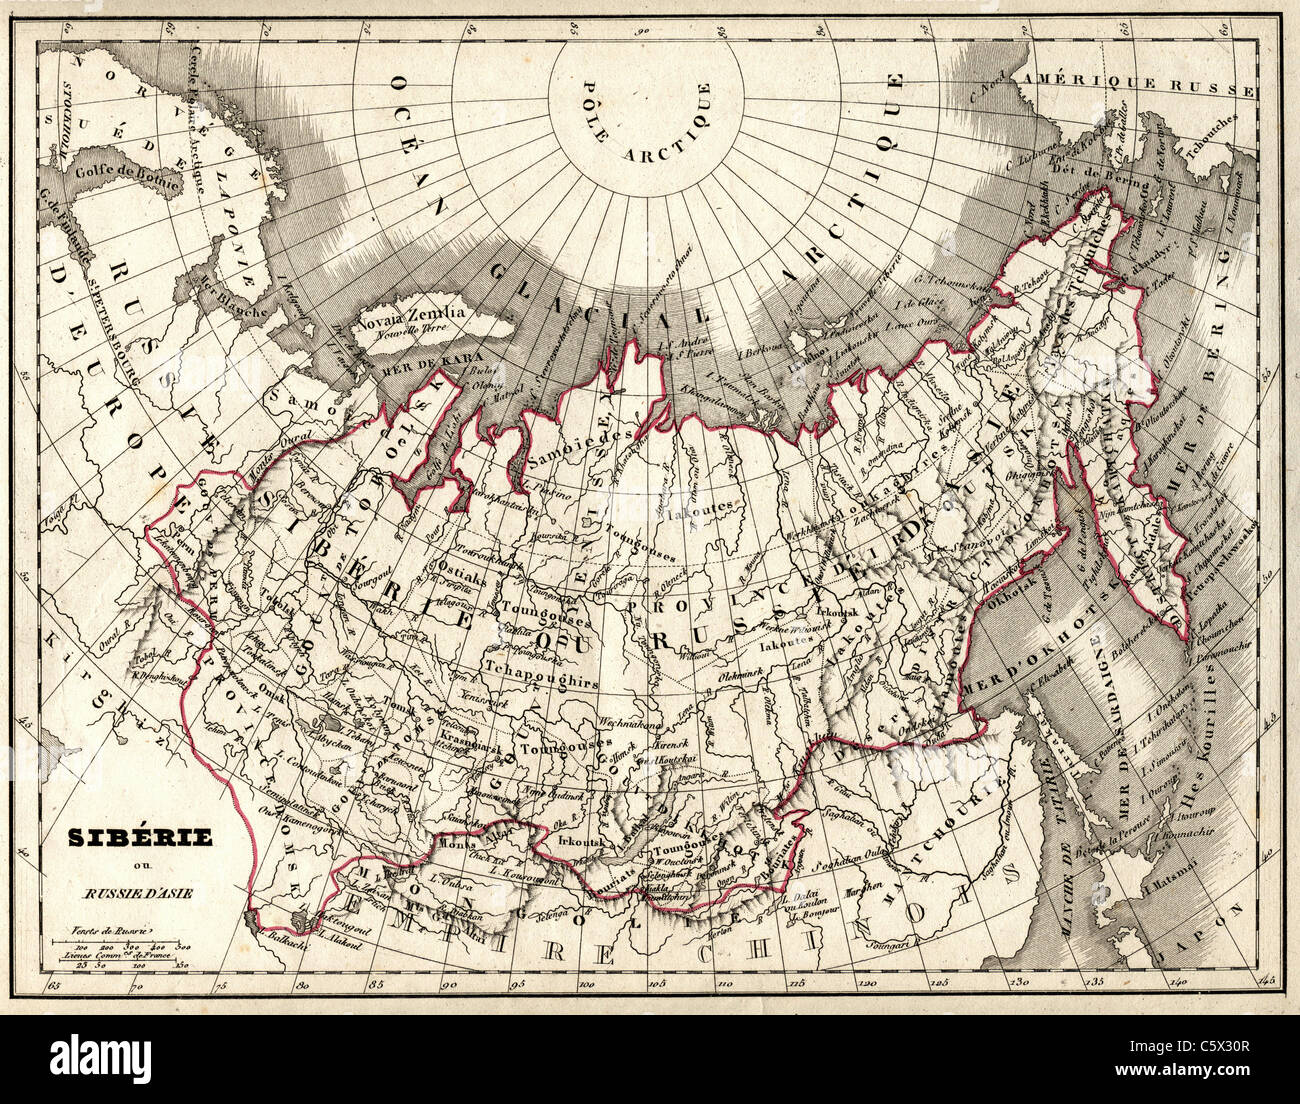 Siberie ou Russe D'Asie (Siberia, Russia in Asia) Antiquarian Map from 'Atlas Universel de Geographie Ancienne and Moderne' by C. V. Monin Stock Photo